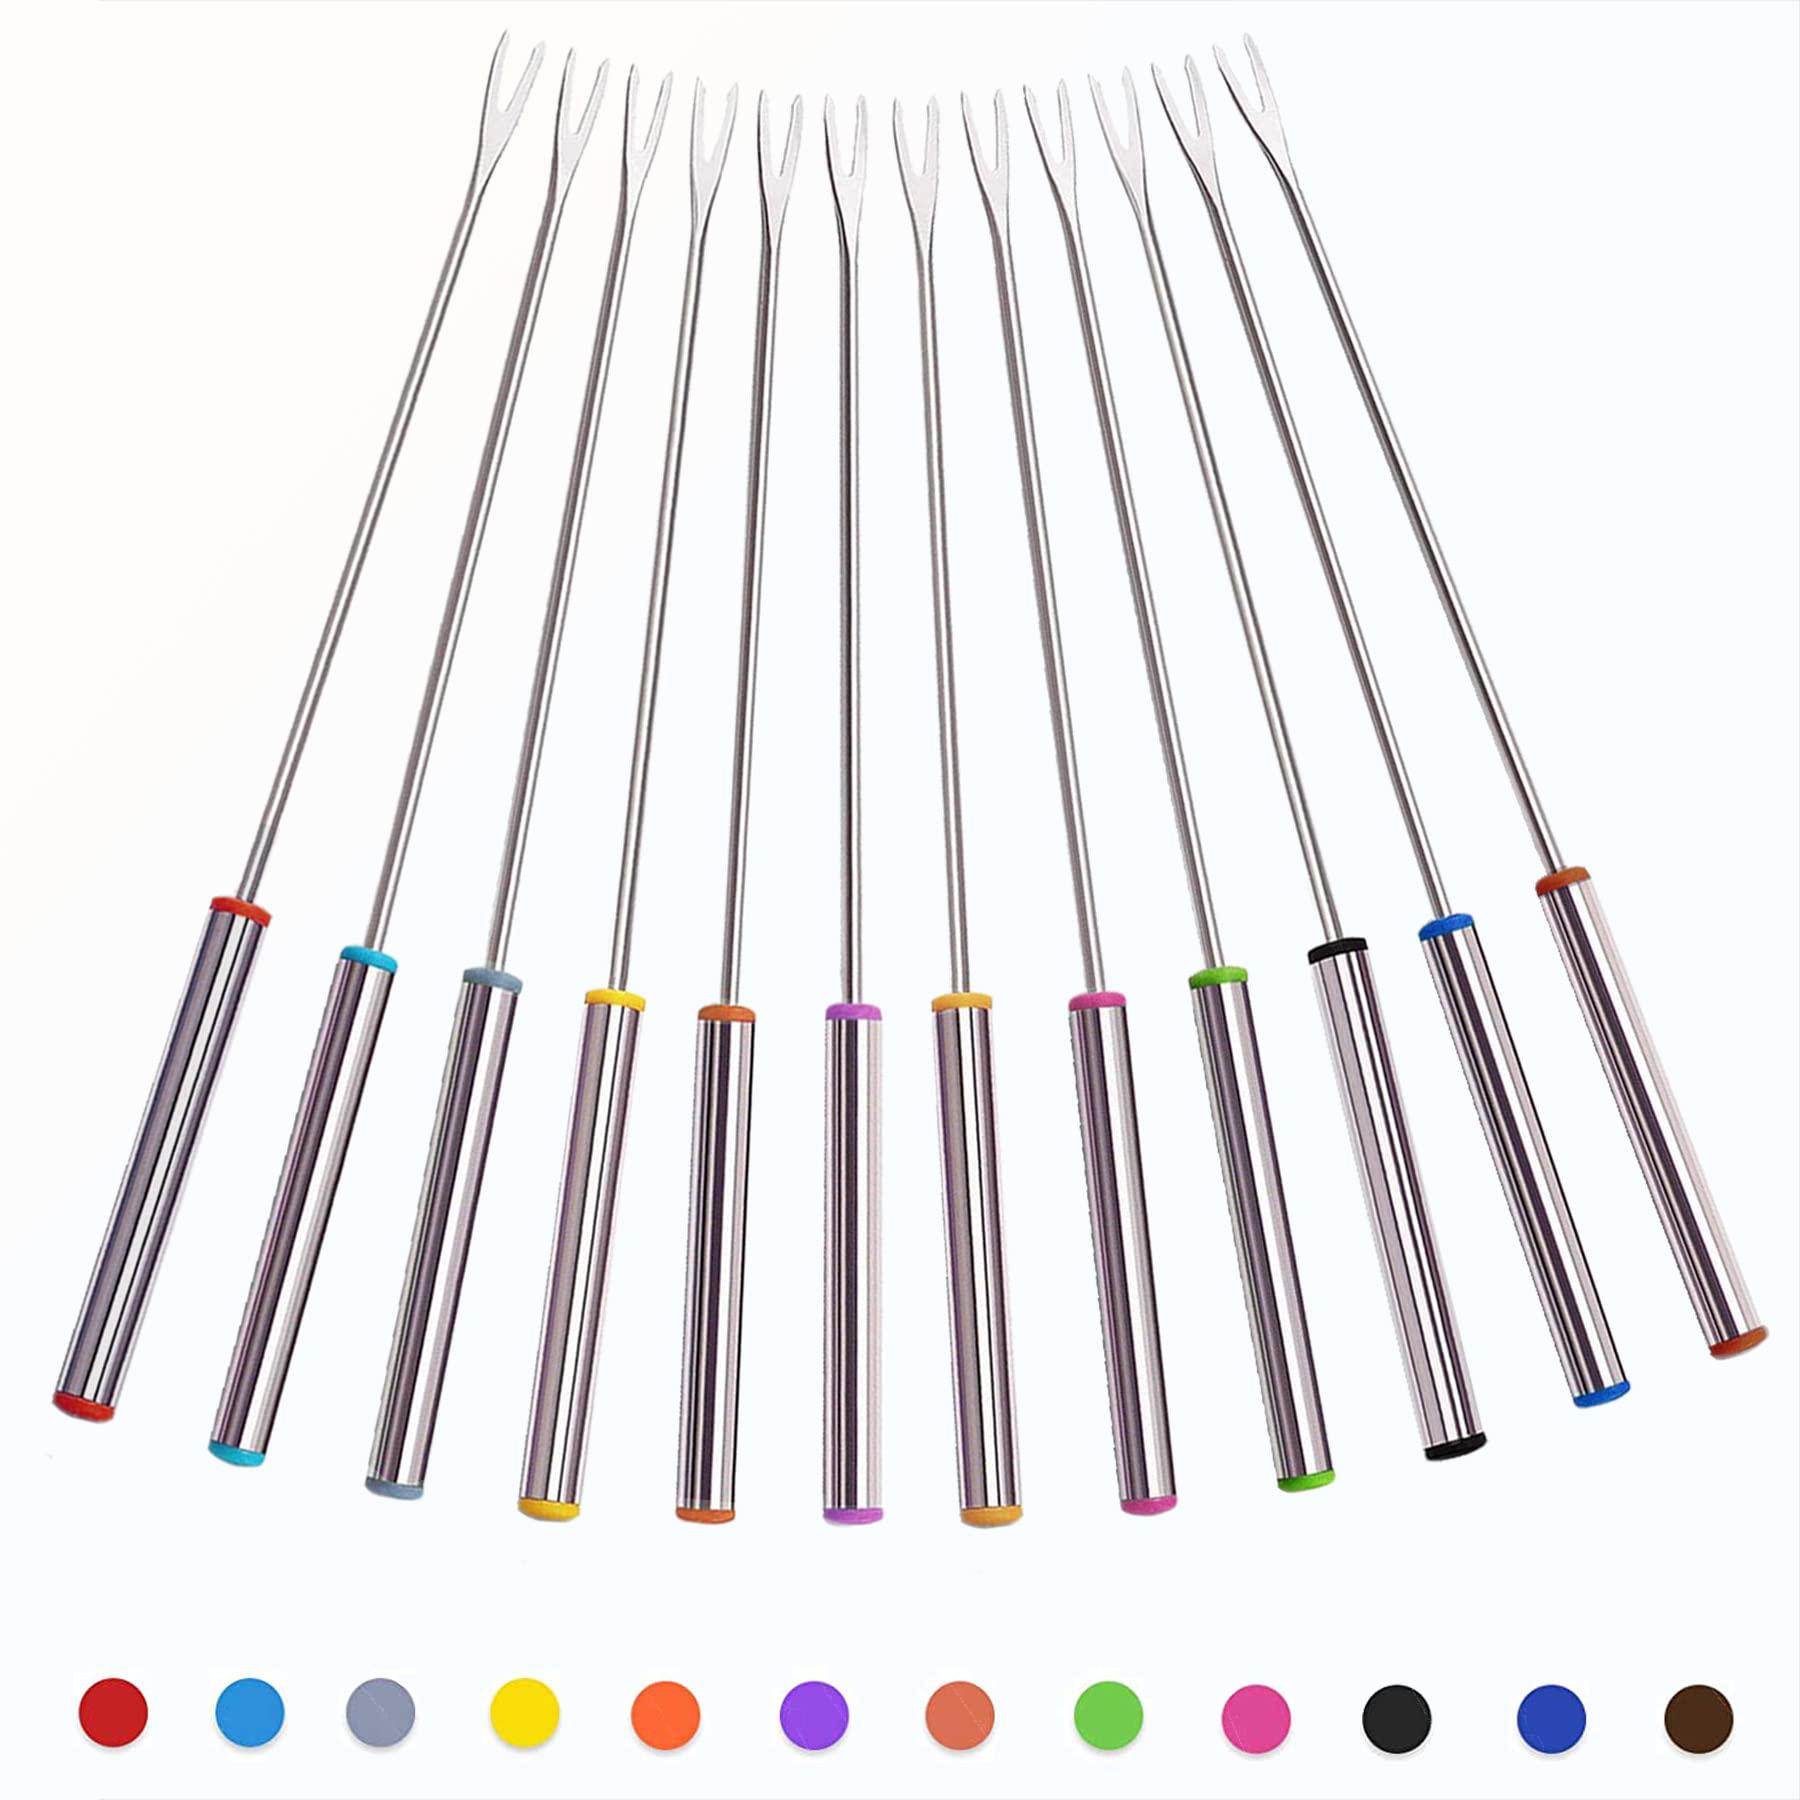 lyjd fondue forks set, 12 color coding stainless steel meat forks with heat resistant handle, length 9.5 inch